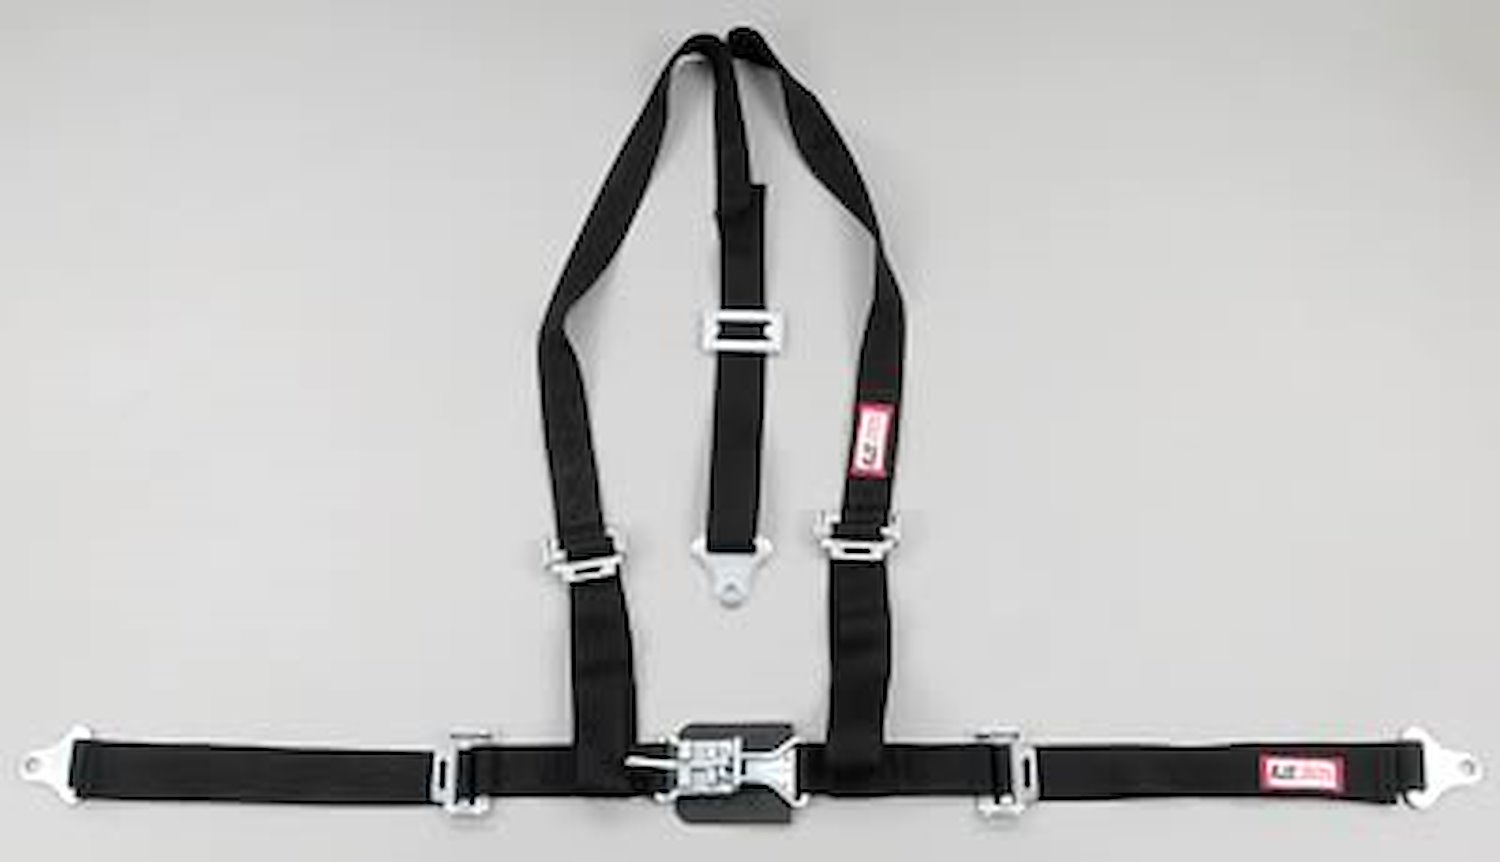 NON-SFI L&L HARNESS 3 PULL DOWN Lap Belt w/Adjuster SNAP 2 S.H. Y FLOOR Mount WRAP/SNAP YELLOW